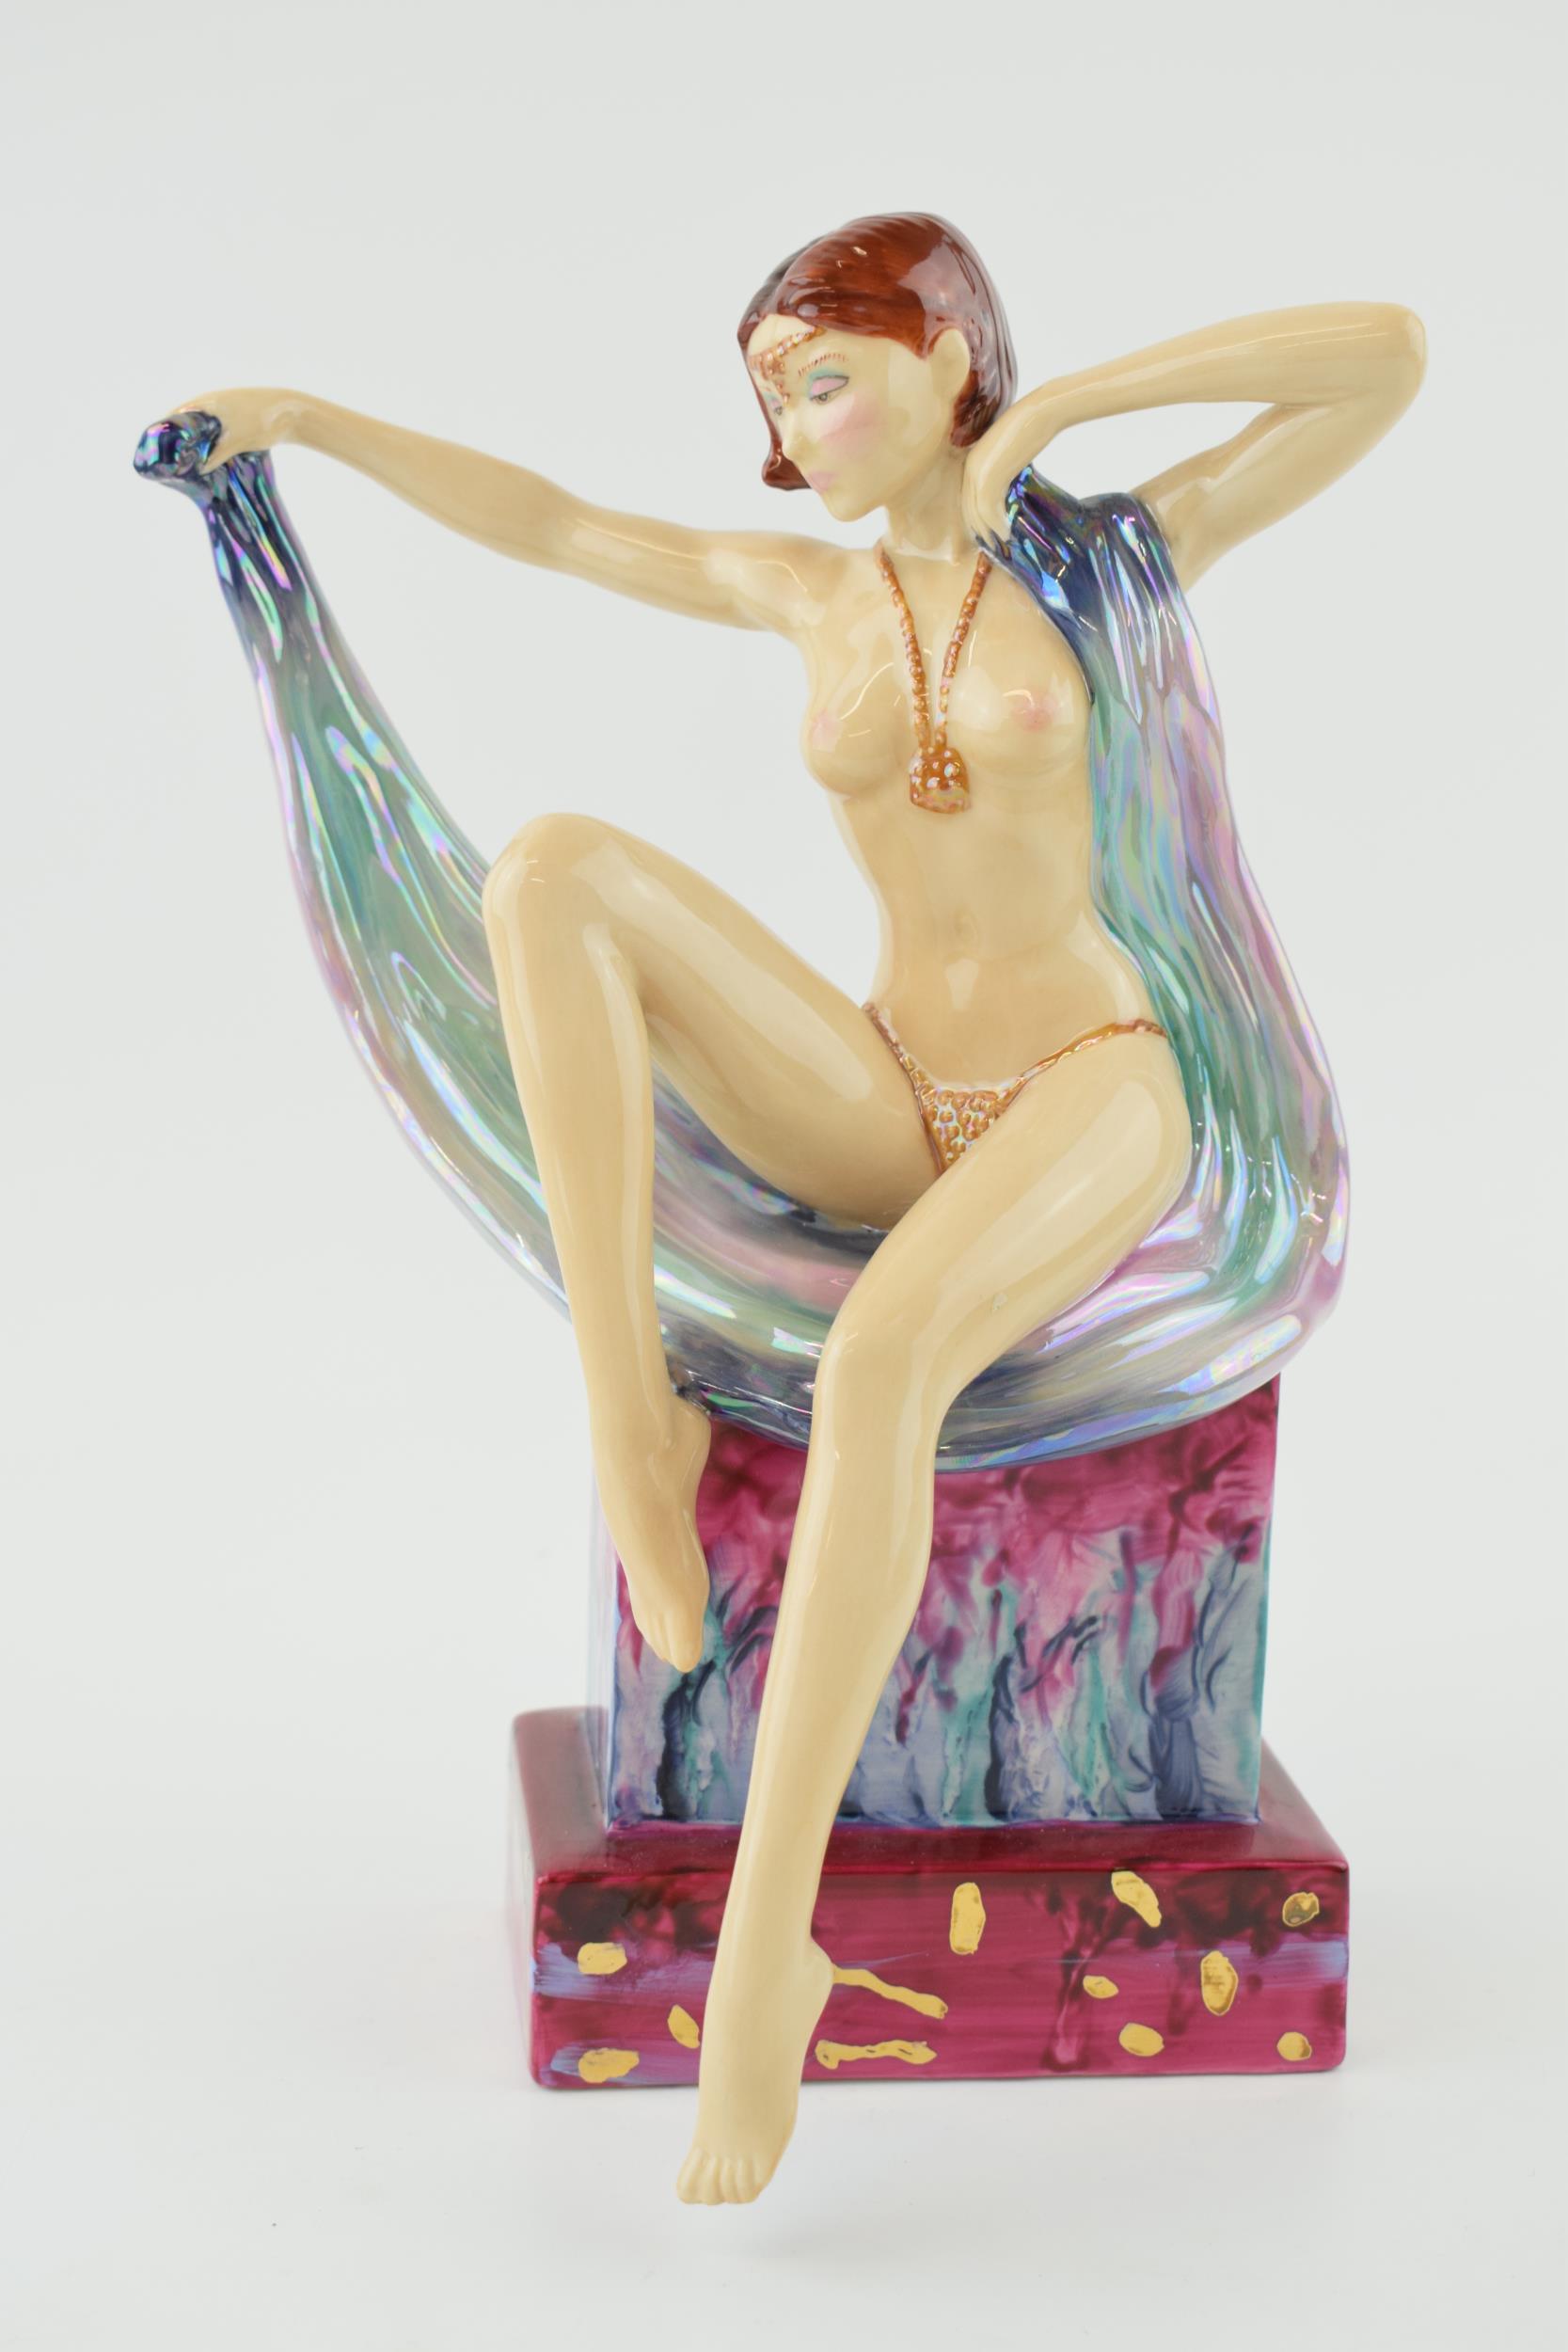 Peggy Davies erotic figure Laura - The Windmill Girl, limited edition, 25cm tall. In good